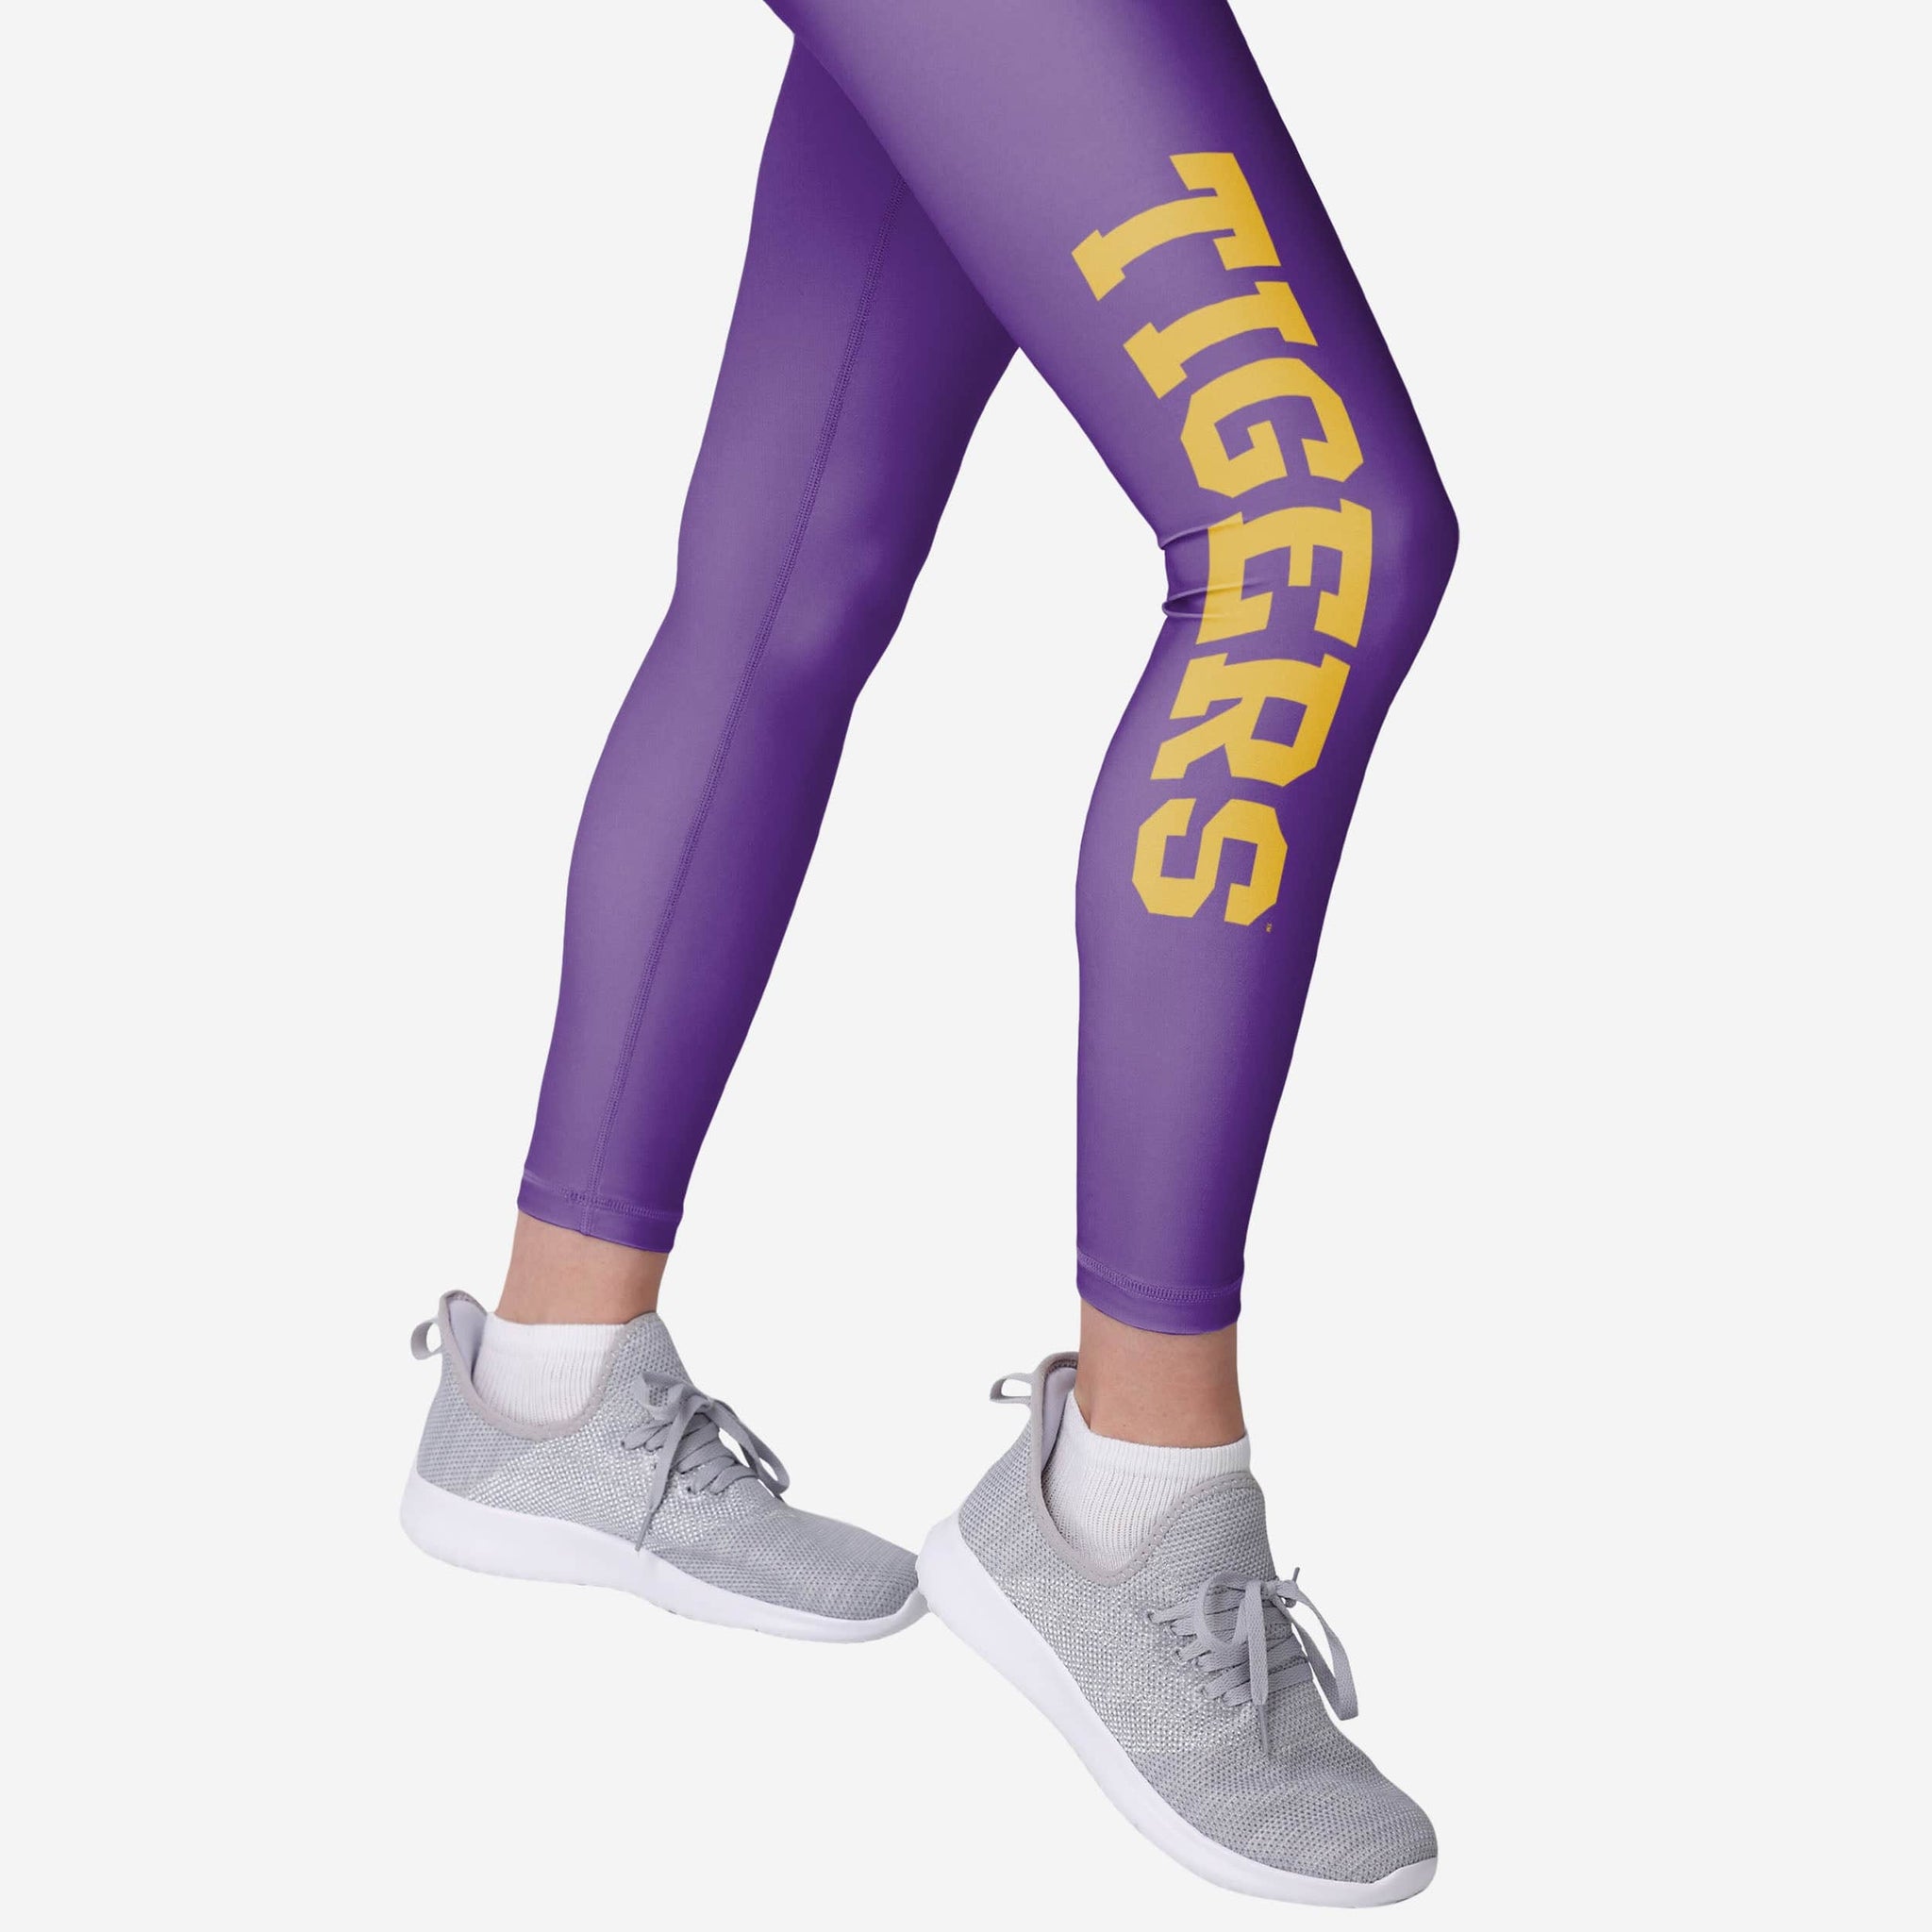  FOCO Golden State Warriors Gradient Print Legging - Womens  Small : Sports & Outdoors